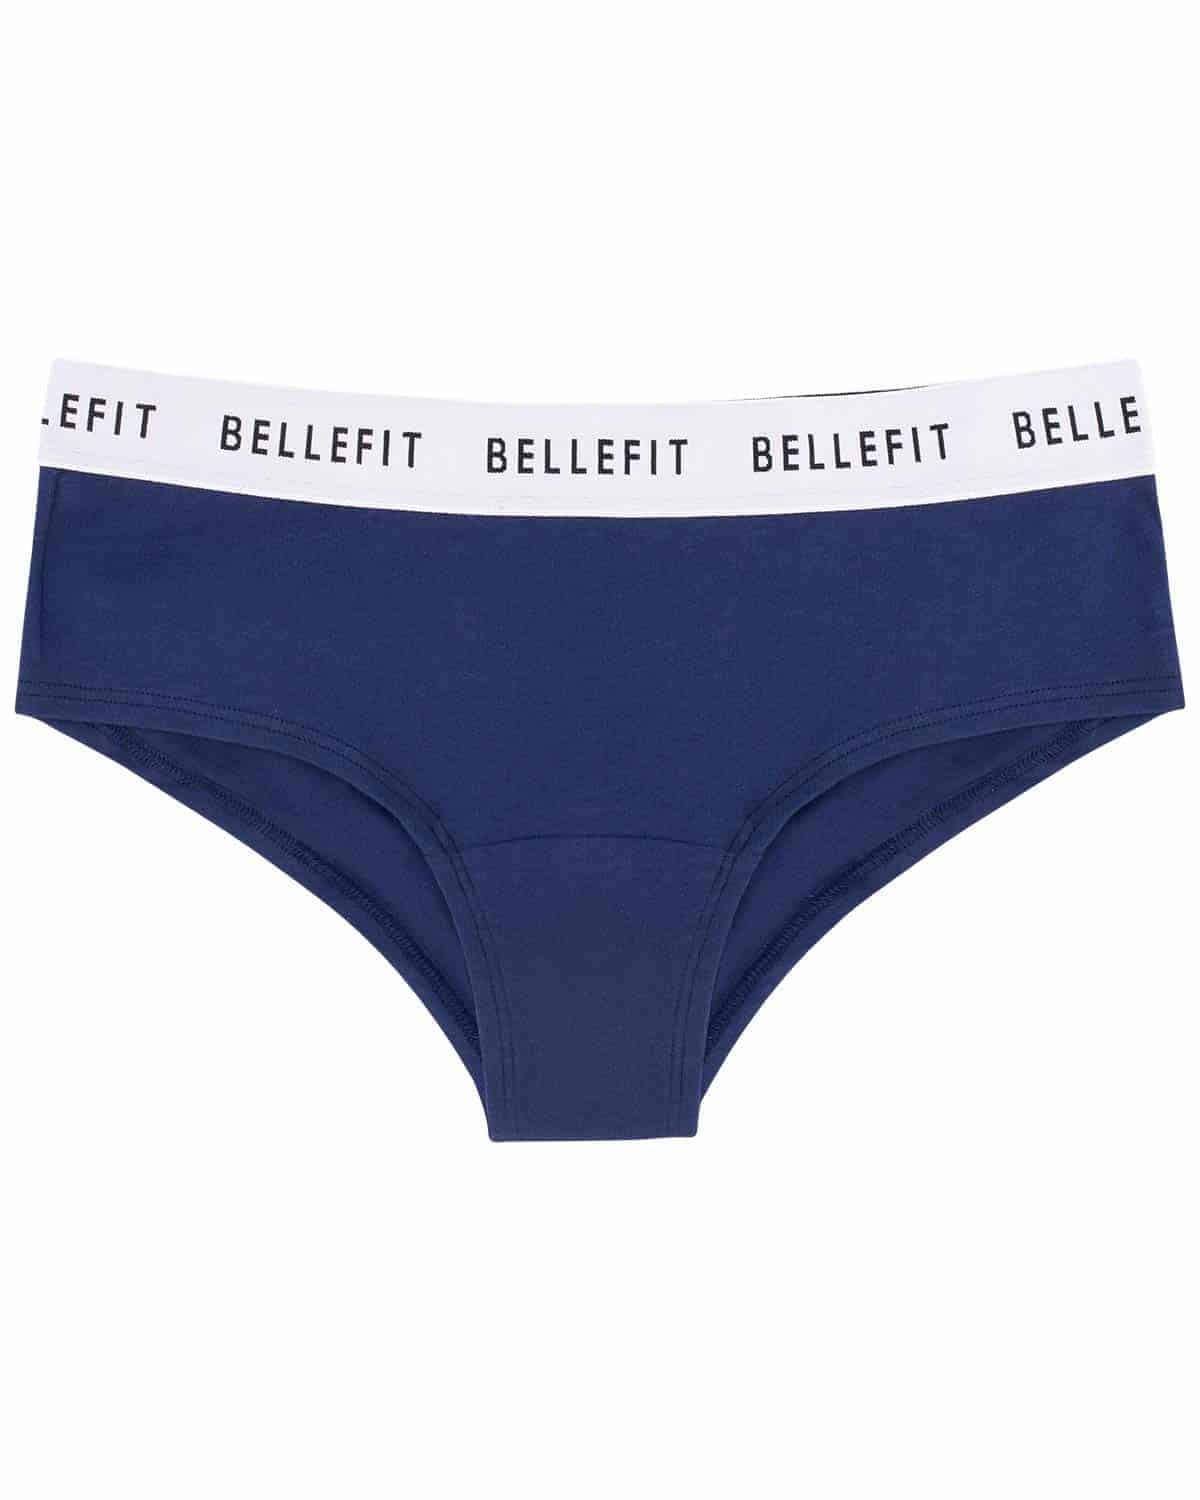 Cotton Bonded Cheeky Panty - Blue dream